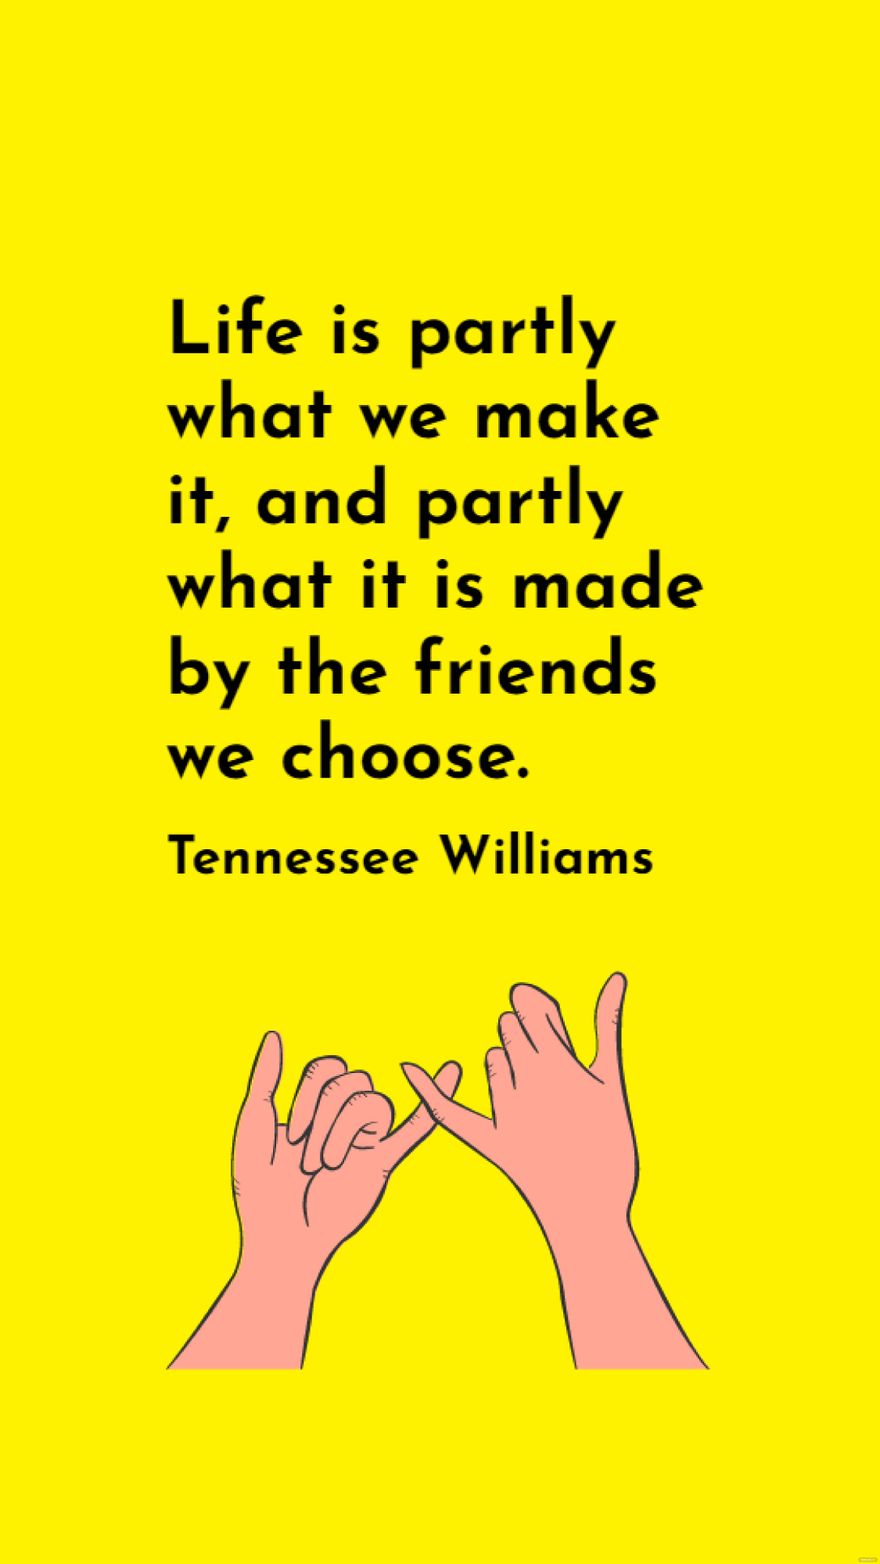 Tennessee Williams - Life is partly what we make it, and partly what it is made by the friends we choose.